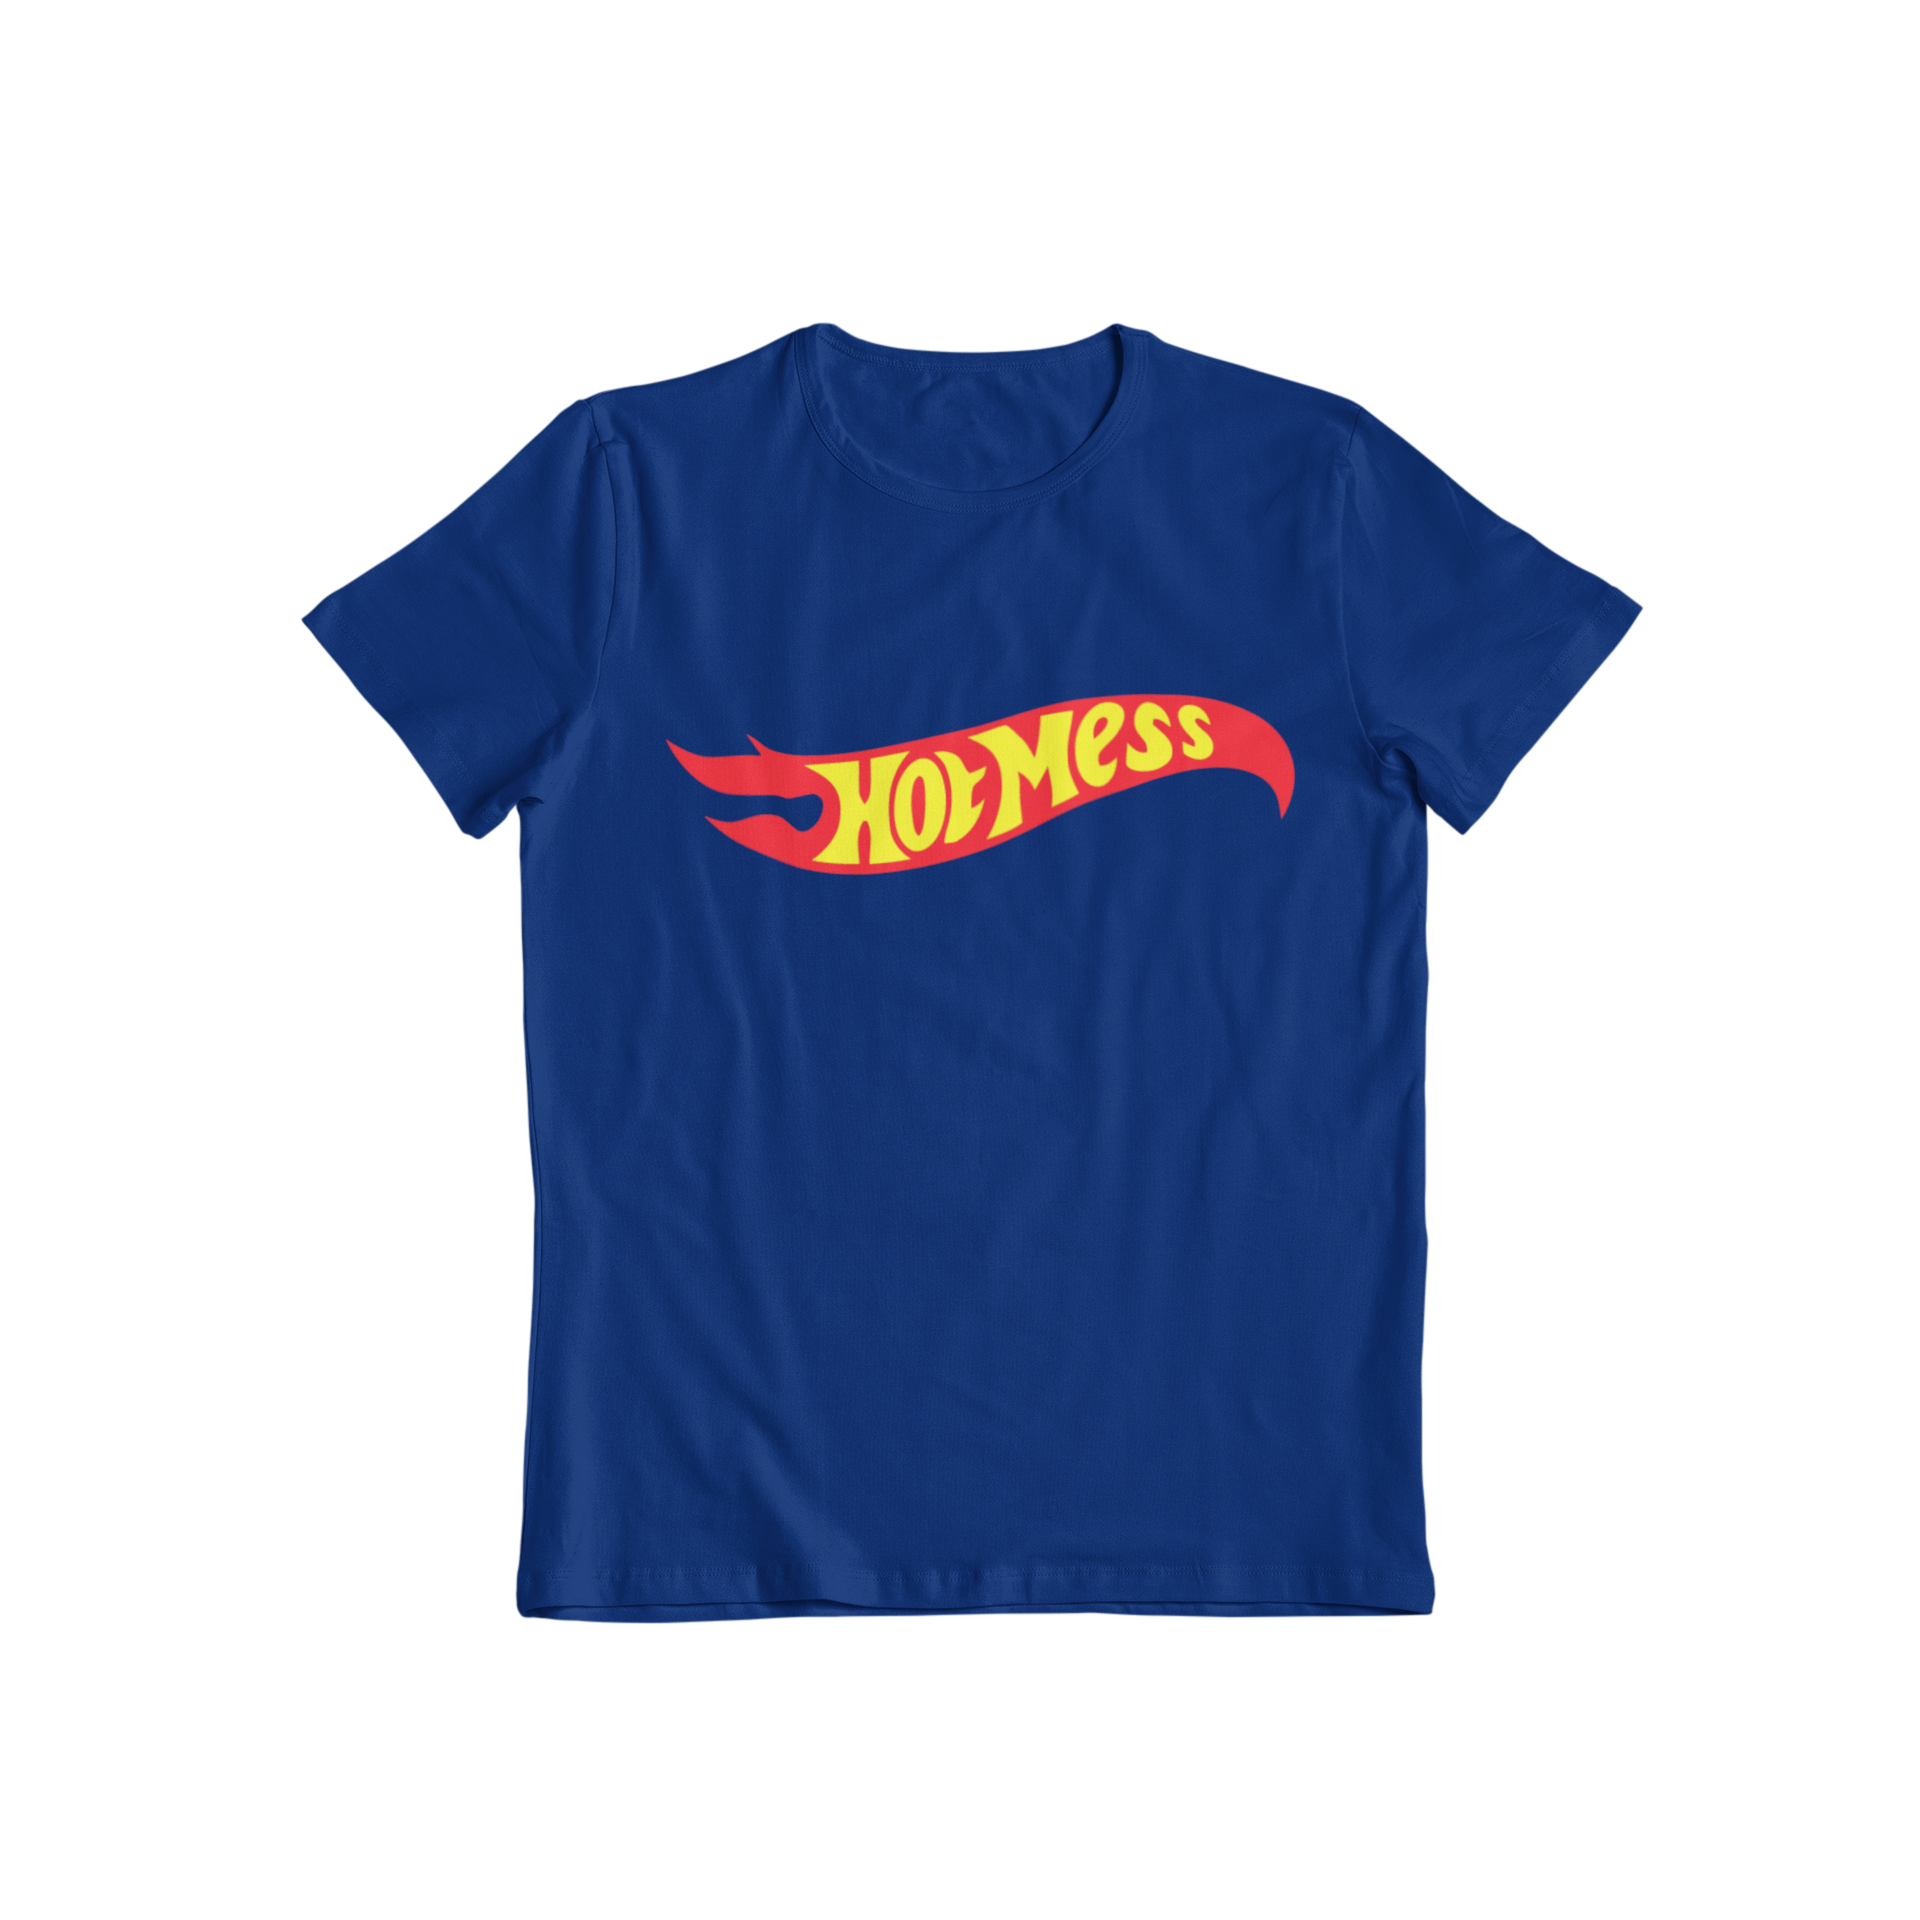 Are you a hot mess? Then you'll love Teevolution's inspired t-shirt design featuring a twist on the classic Hot Wheels logo. Show off your fun-loving personality and sense of humor with this unique t-shirt. Order yours today from Teevolution!